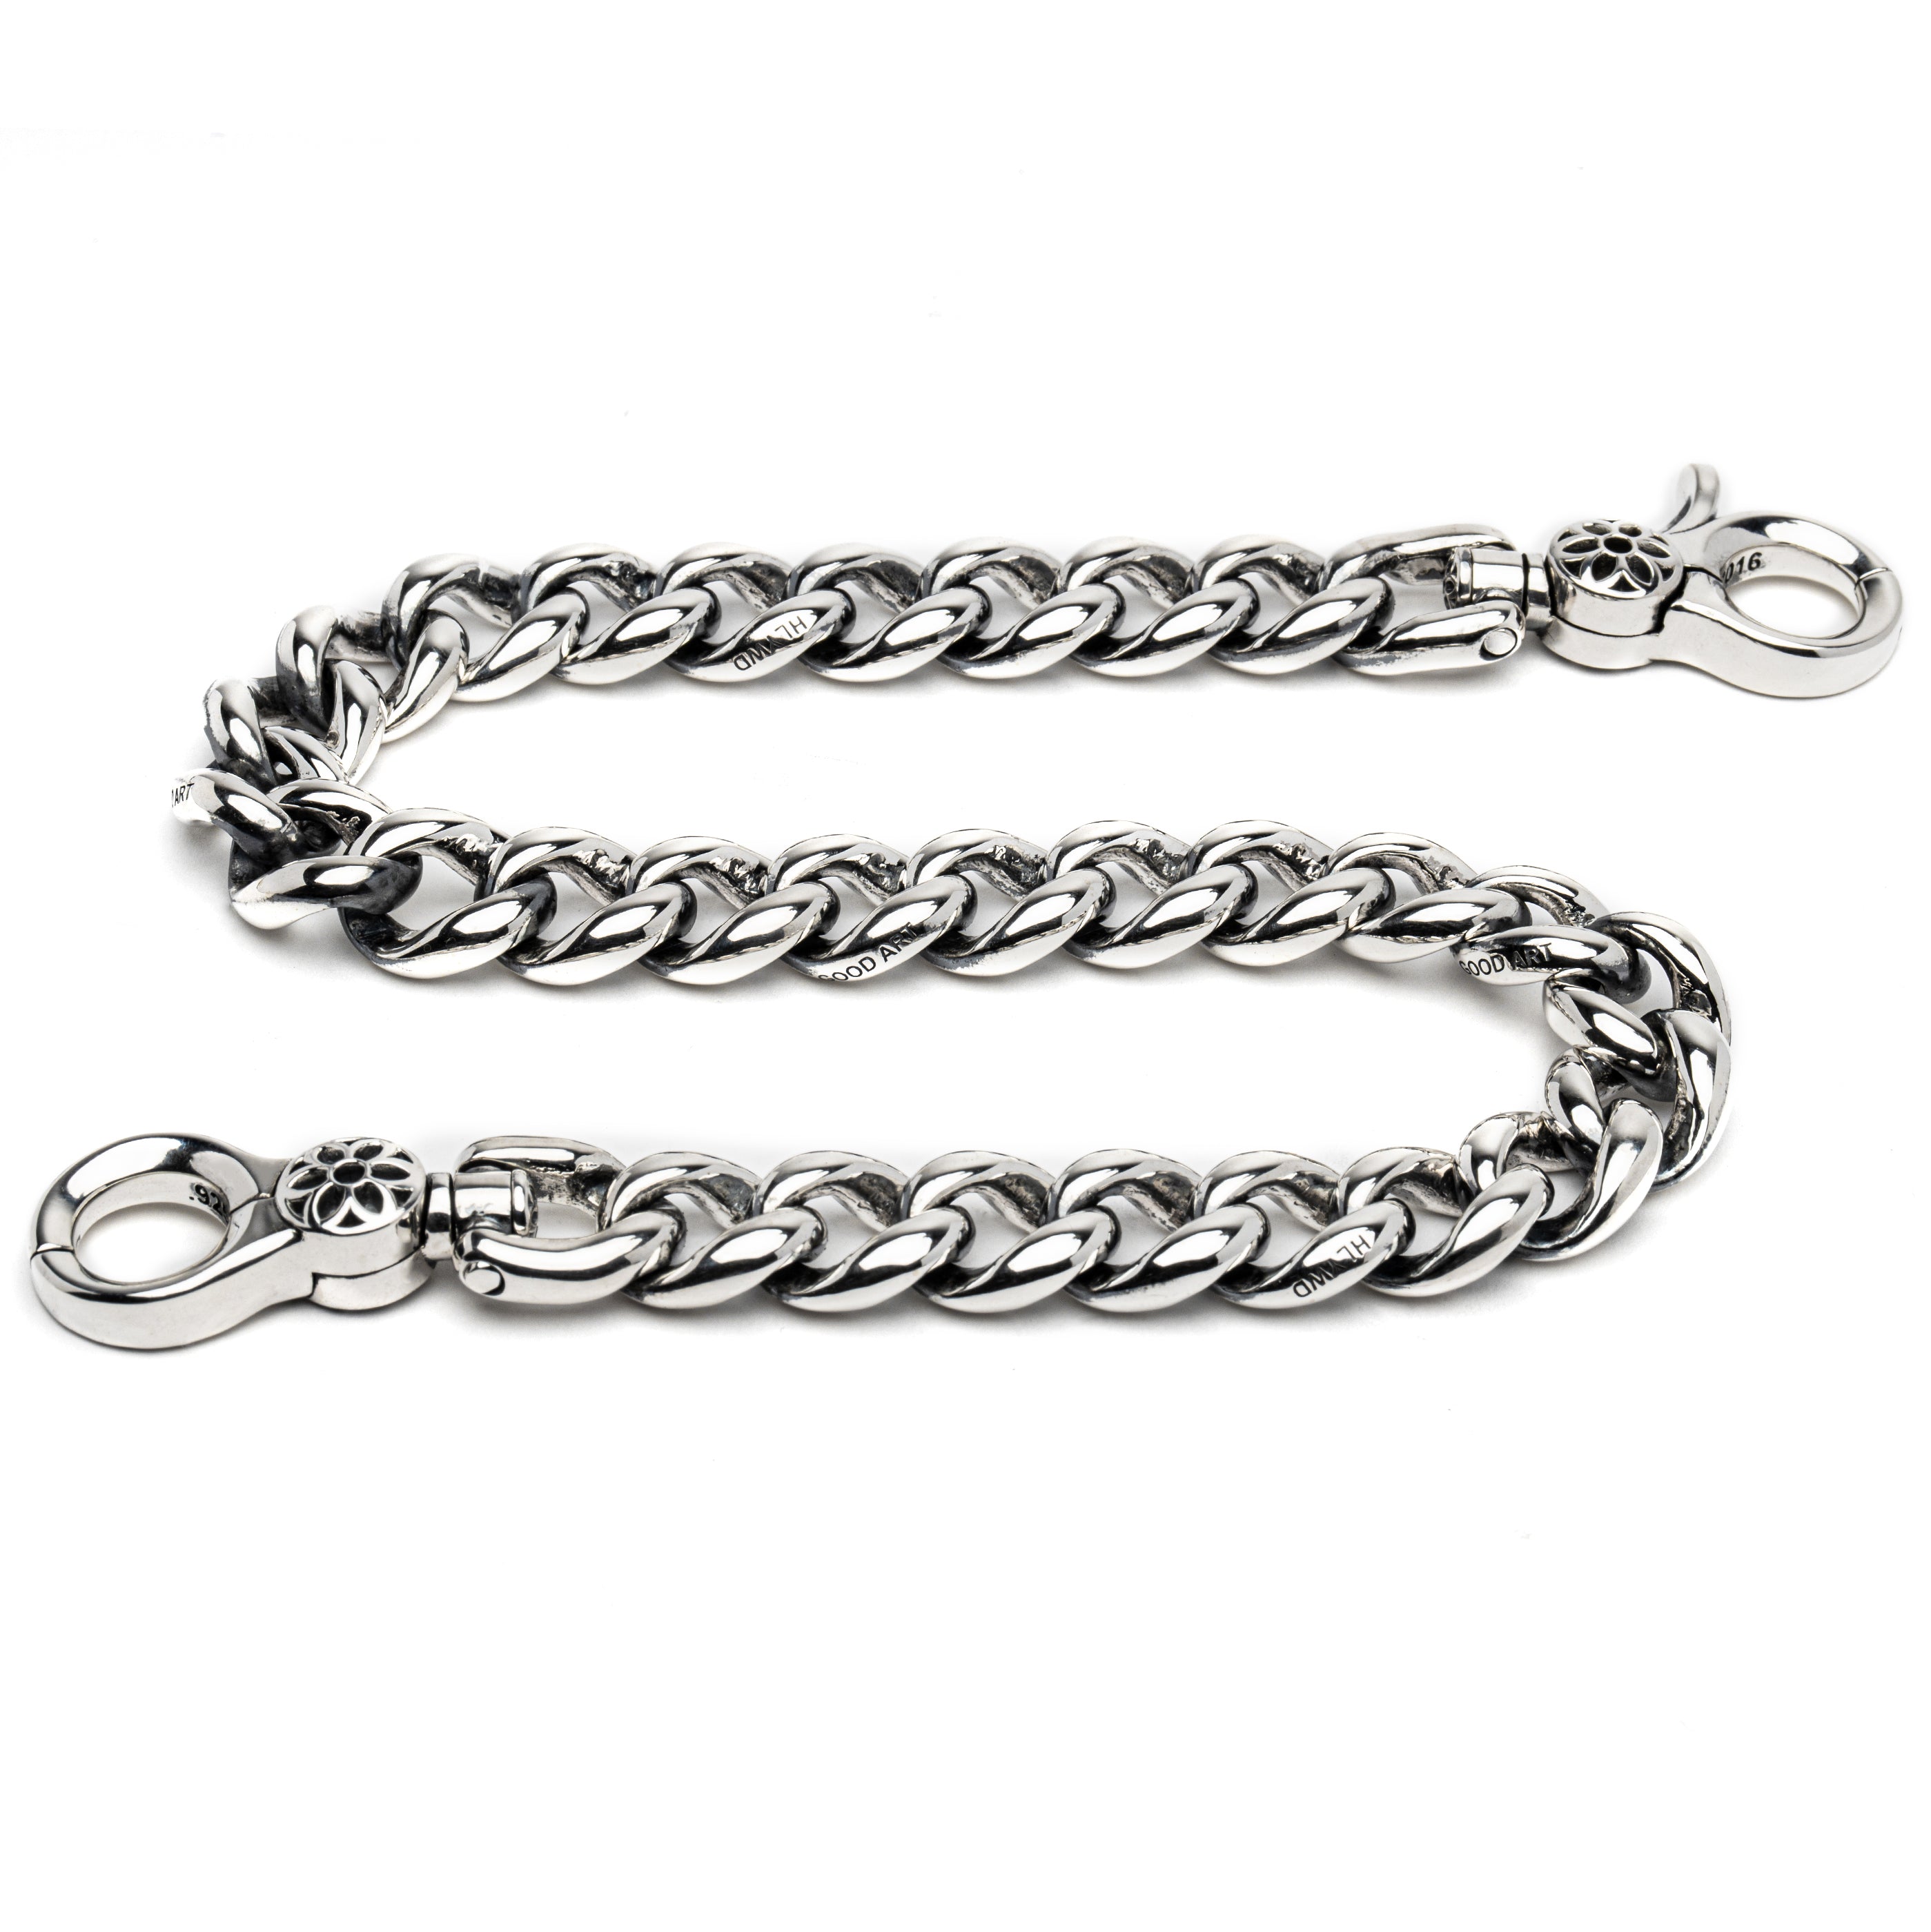 Beautiful long wallet chain, with Rosette motif on both clip ends.